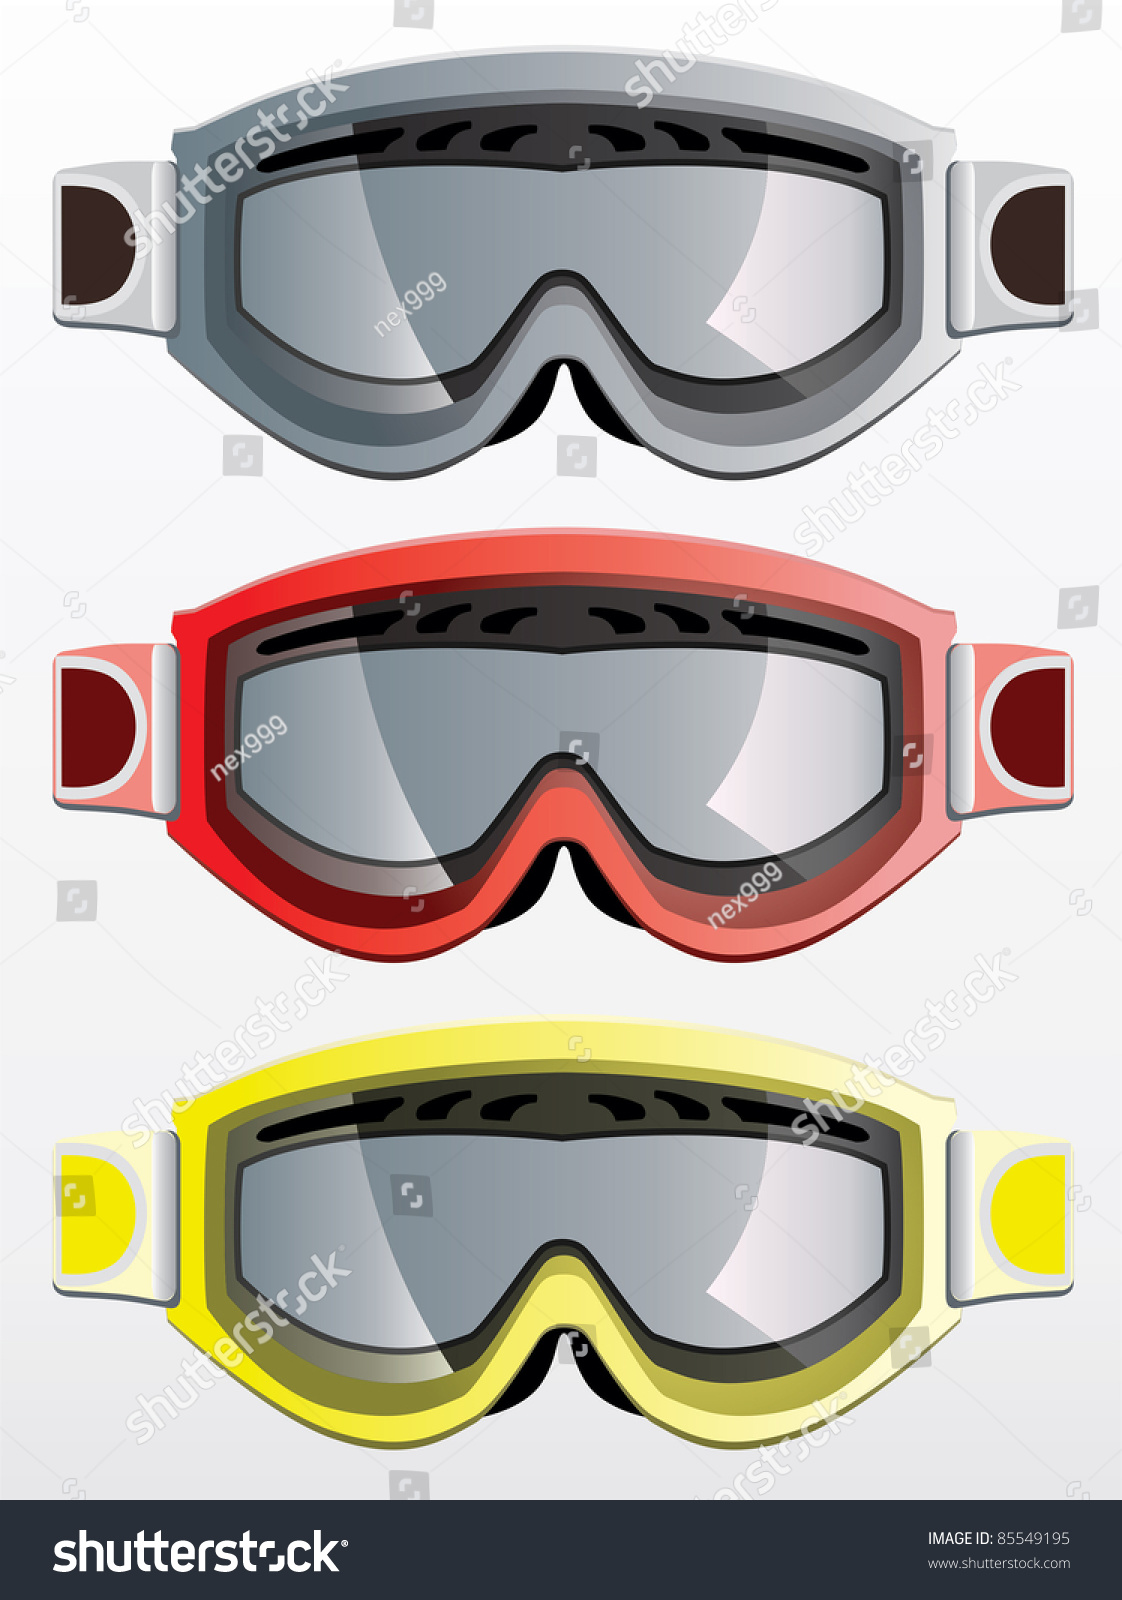 Vector Ski Goggles Isolated On White Background - 85549195 : Shutterstock